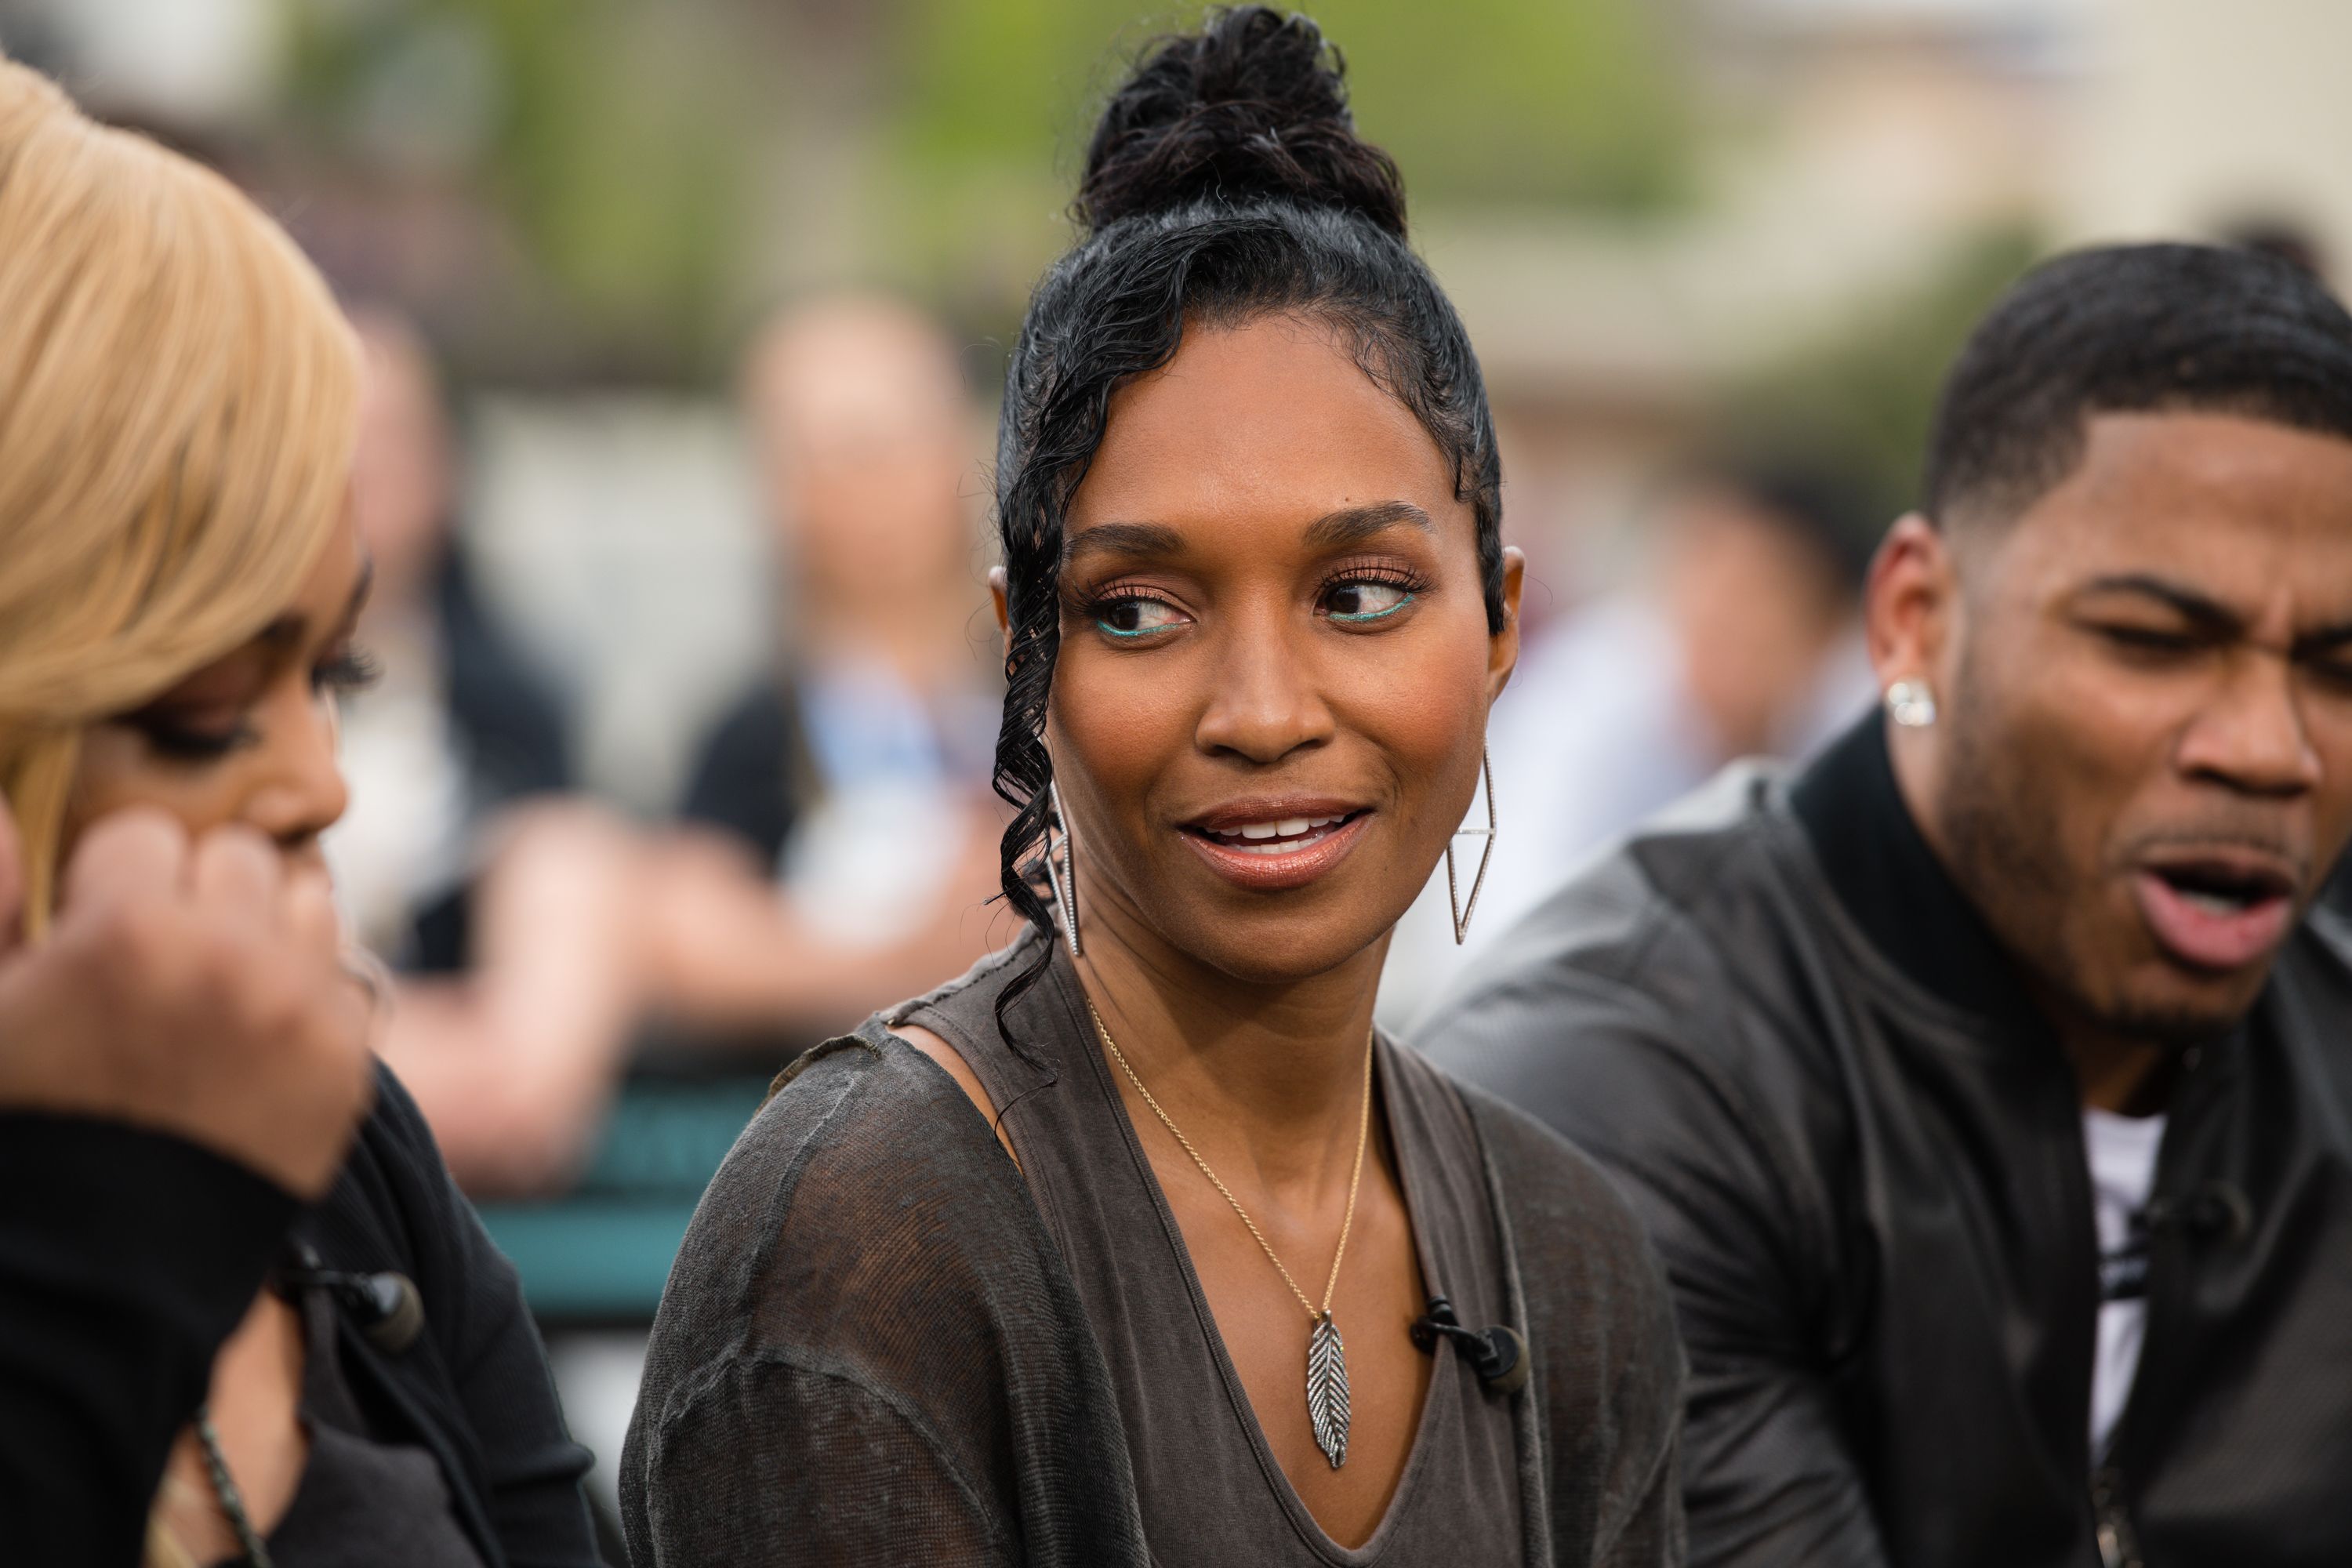 Rozonda 'Chilli' Thomas drops by "Extra" at Universal Studios Hollywood on May 15, 2019 in Universal City, California. | Source: Getty Images